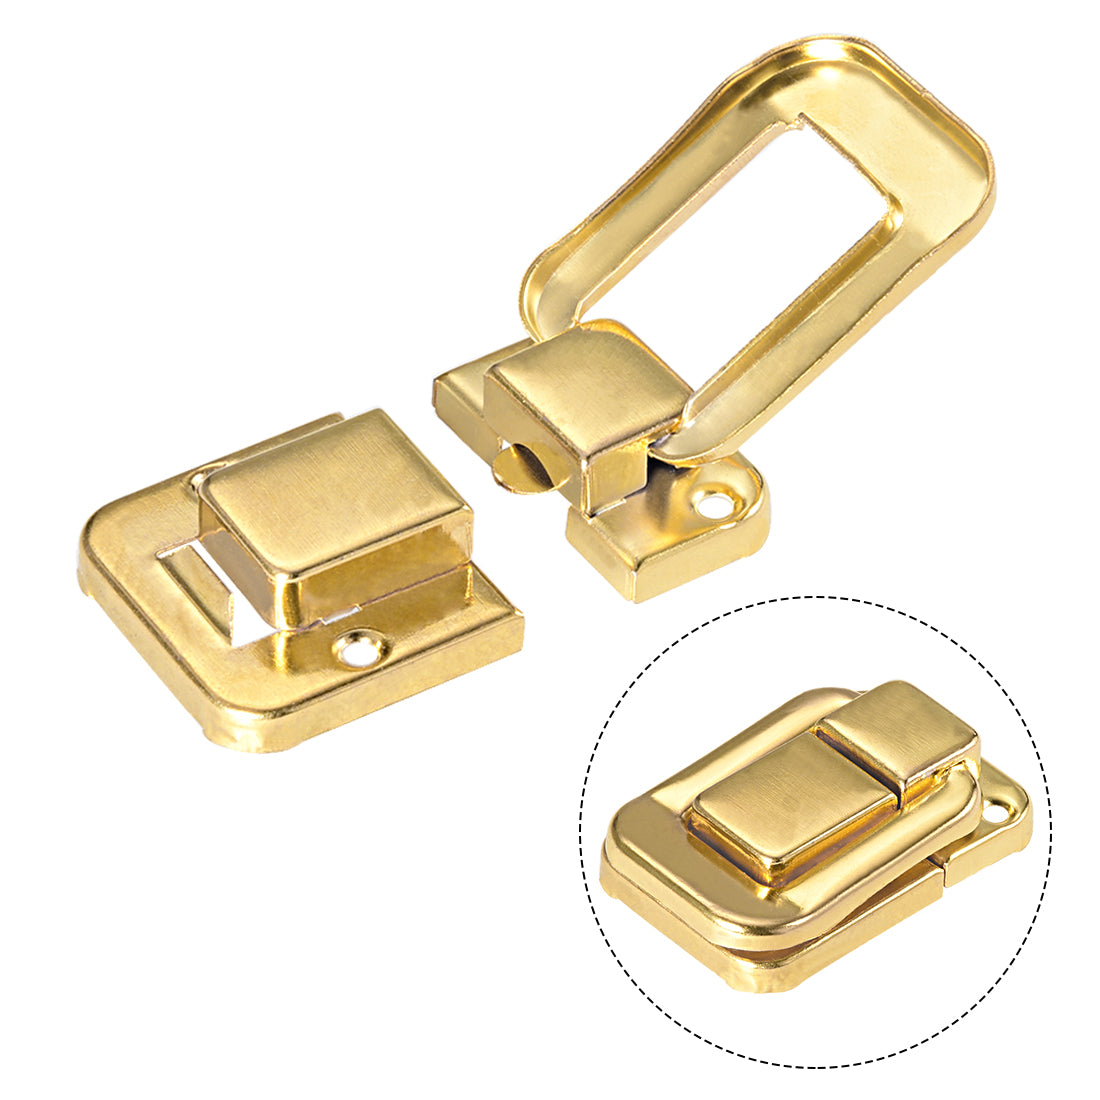 uxcell Uxcell Toggle Latch, 48mm Retro Style Golden Decorative Hasp Jewelry Box Catch w Screws 5 pcs